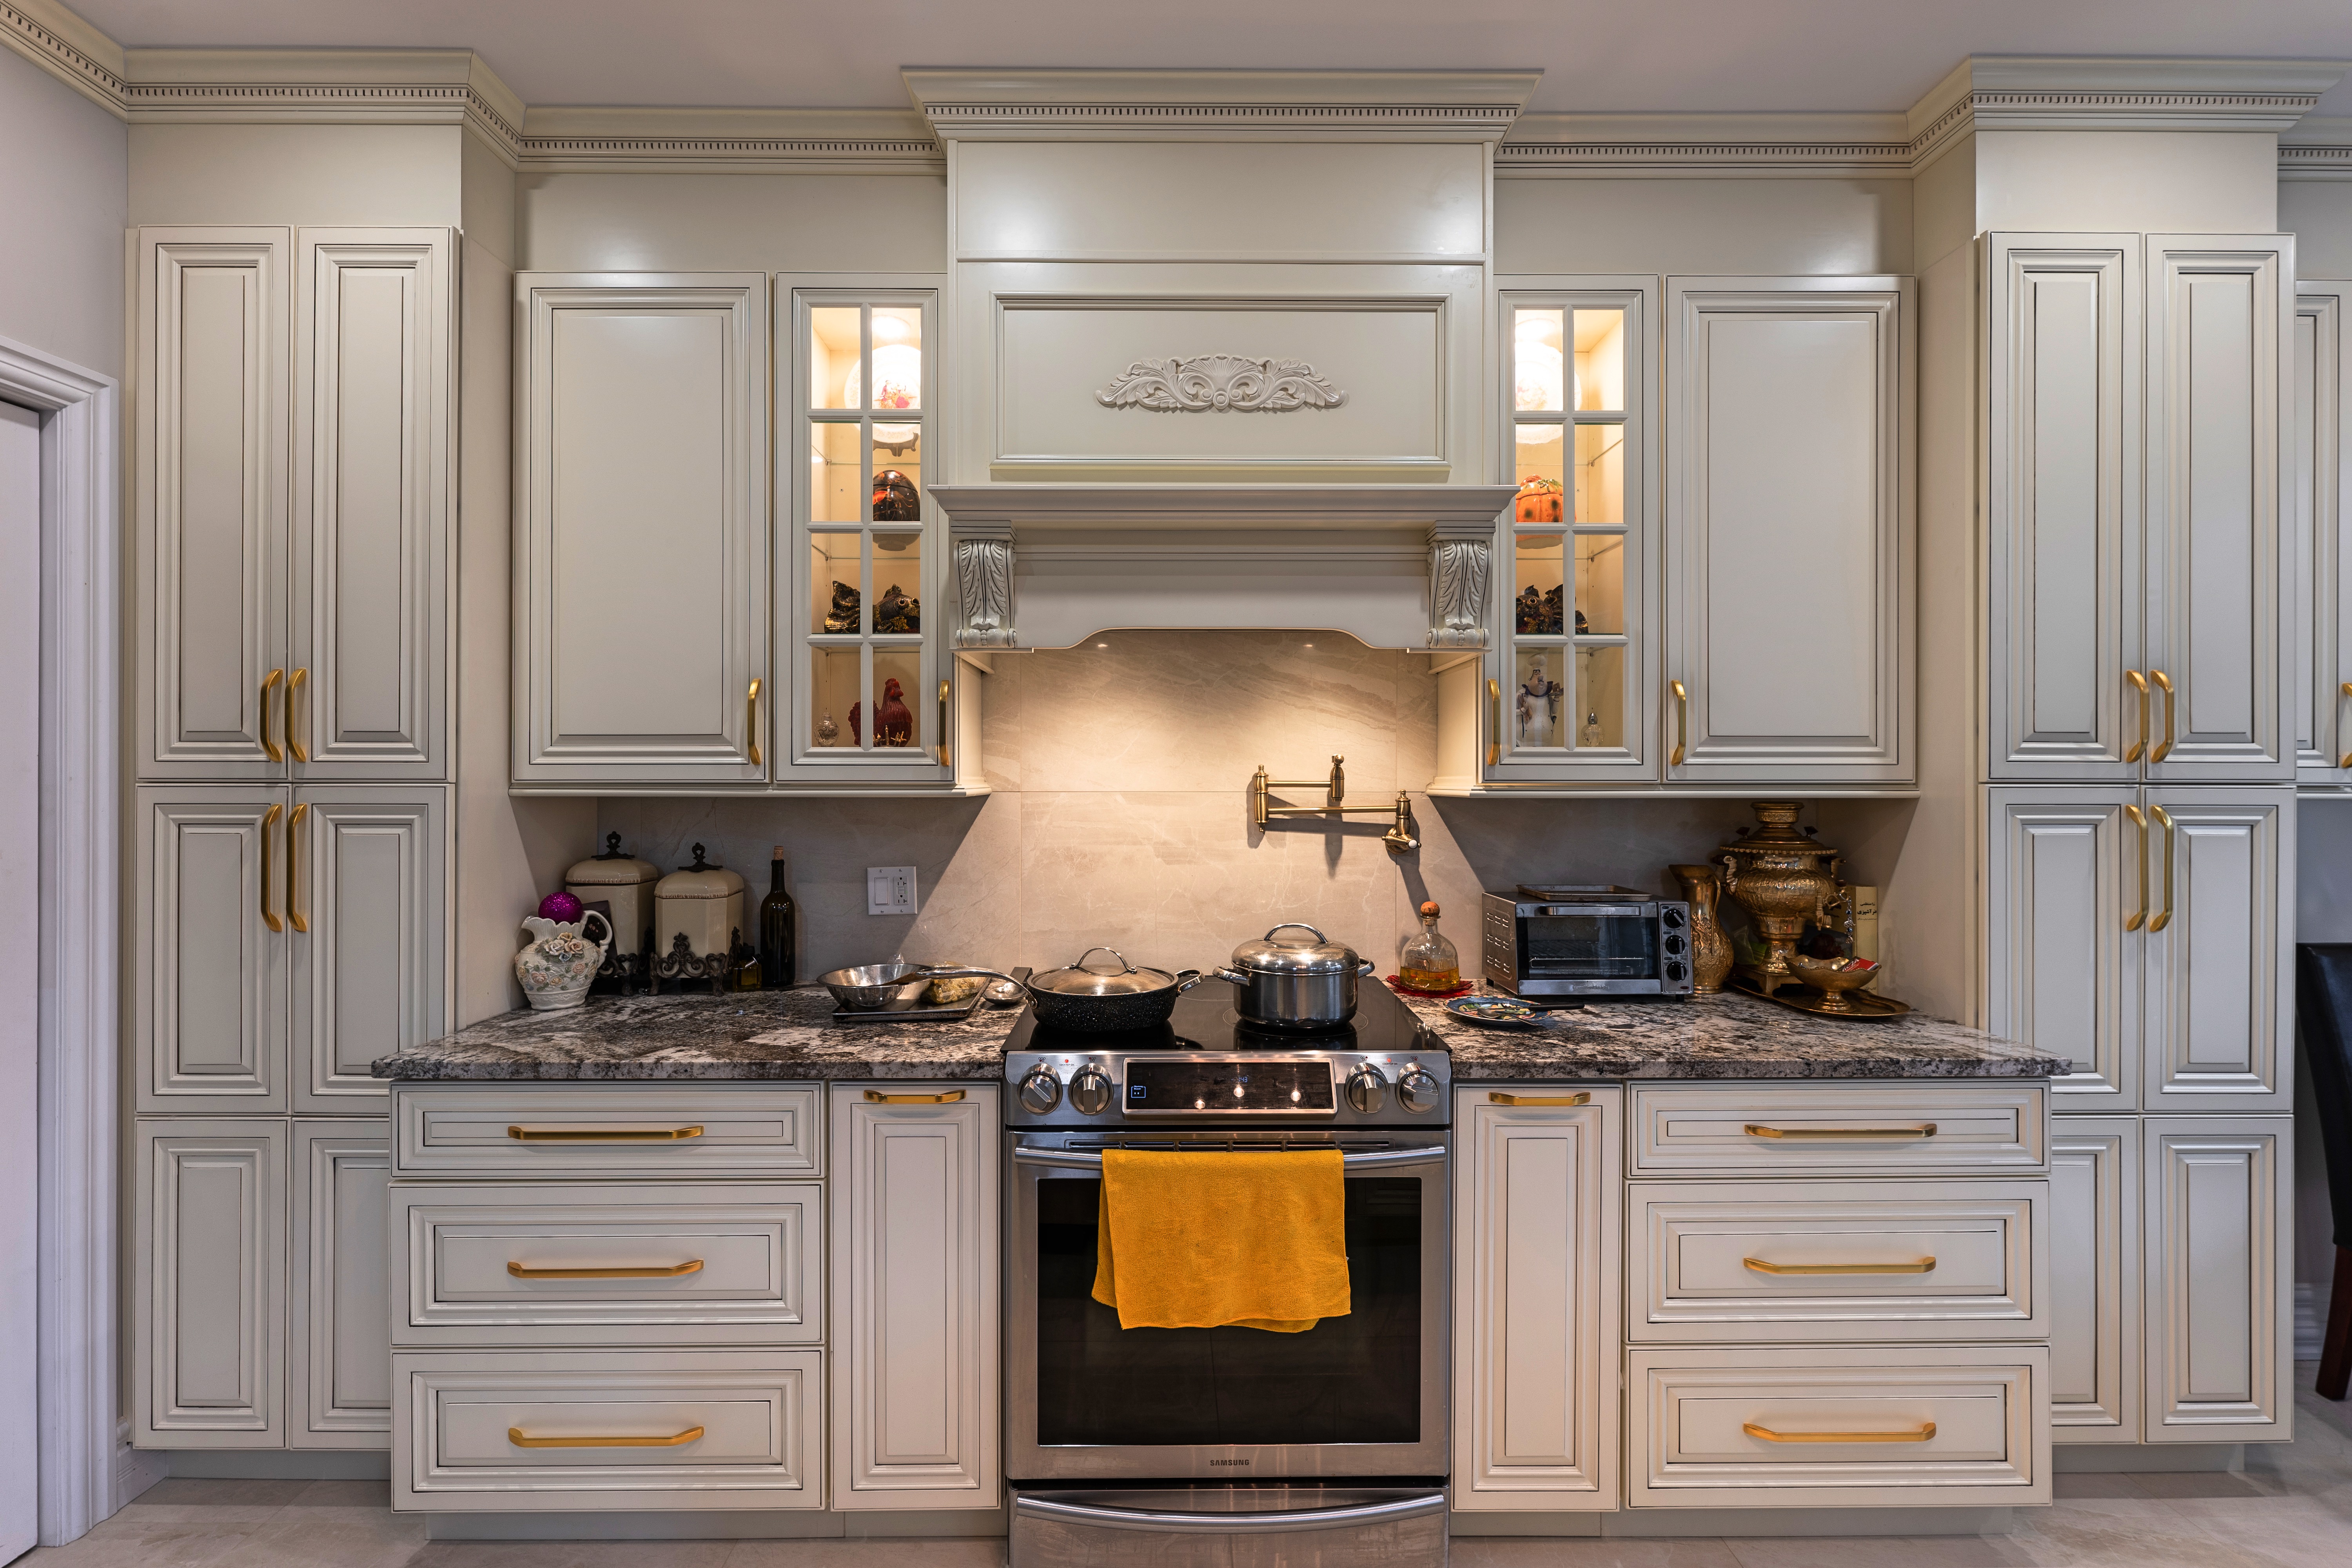 Floor To Ceiling Kitchen Cabinets